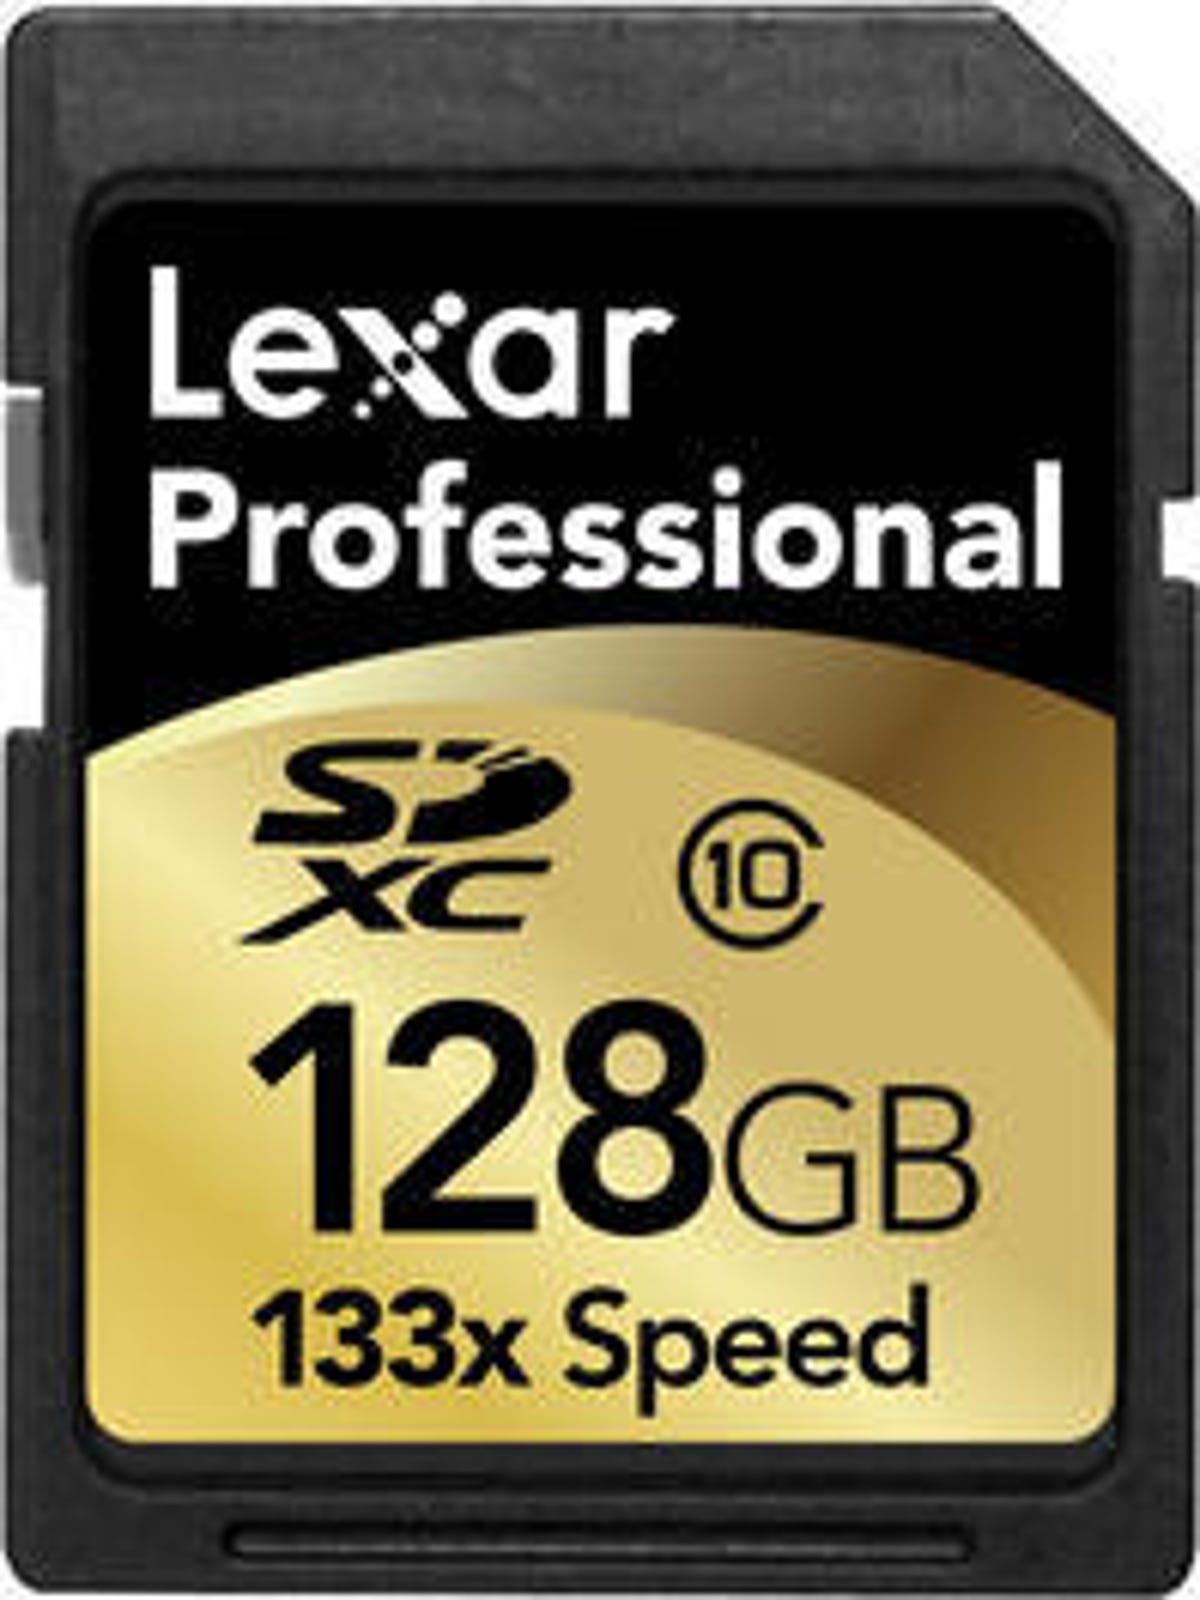 Lexar's first SDXC memory cards, due to ship this quarter, include a $500 64GB and $700 128GB model.